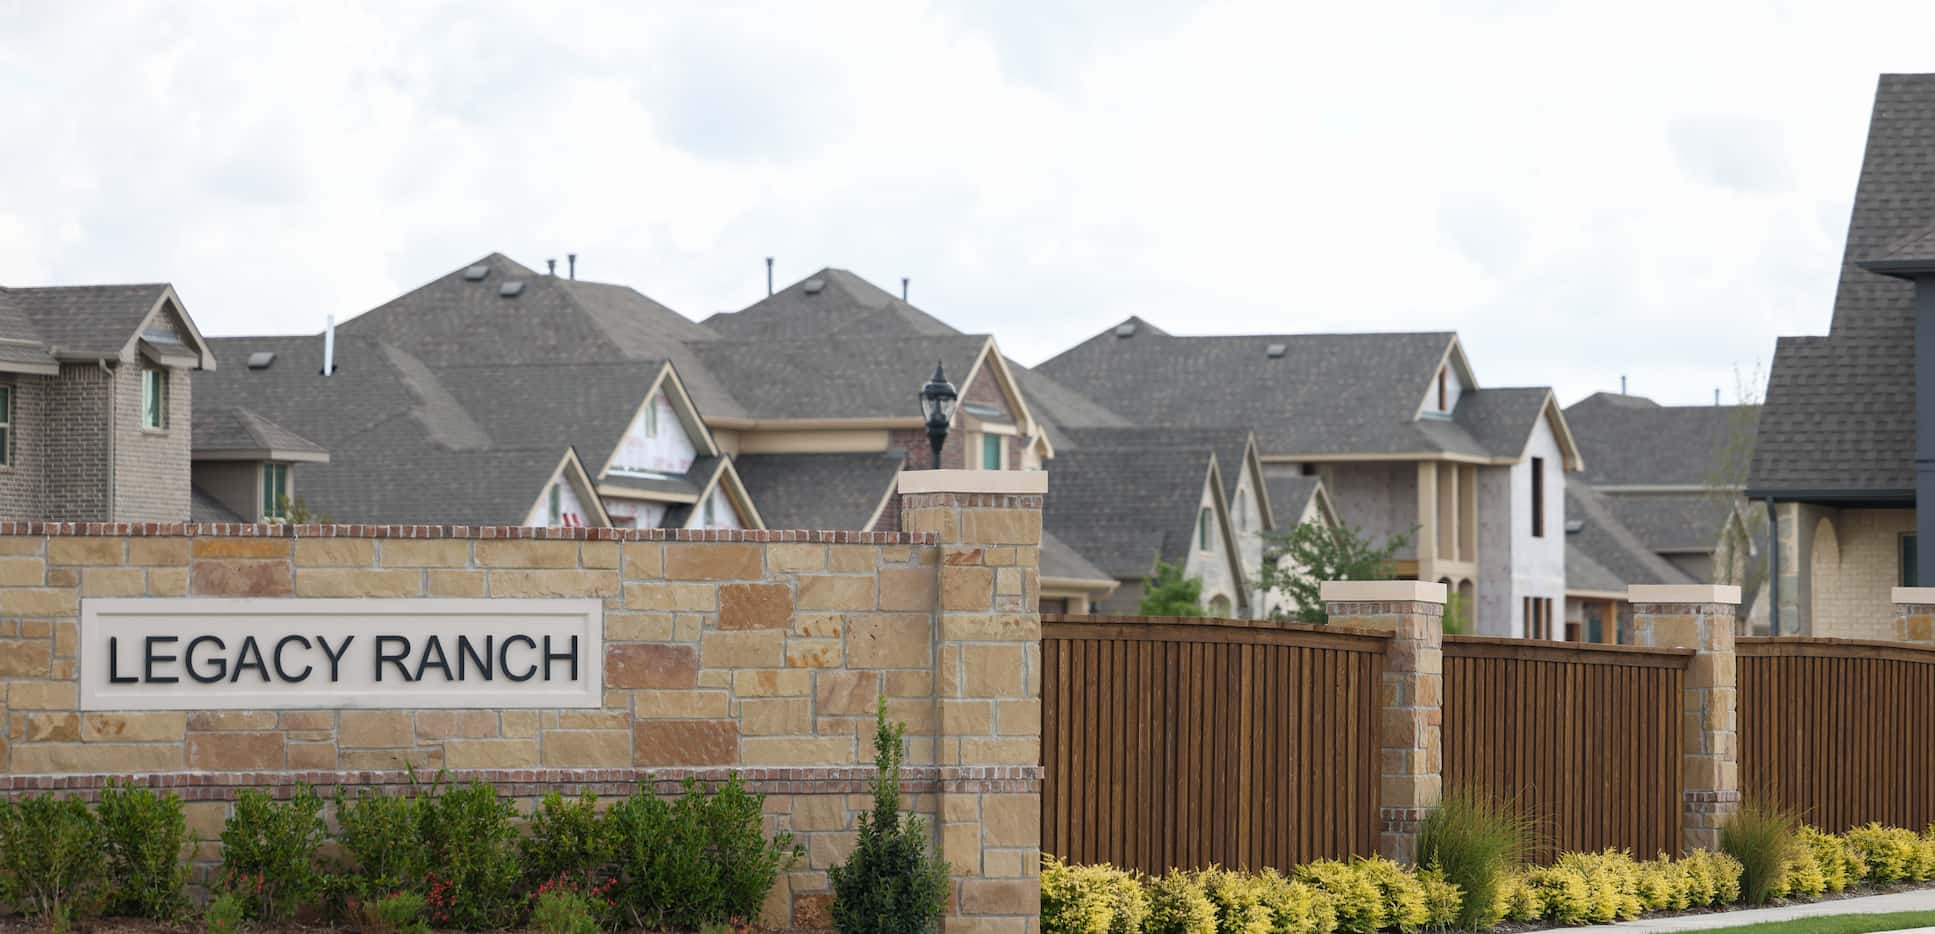 The entrance to the Legacy Ranch housing development is marked with a sign off of North...